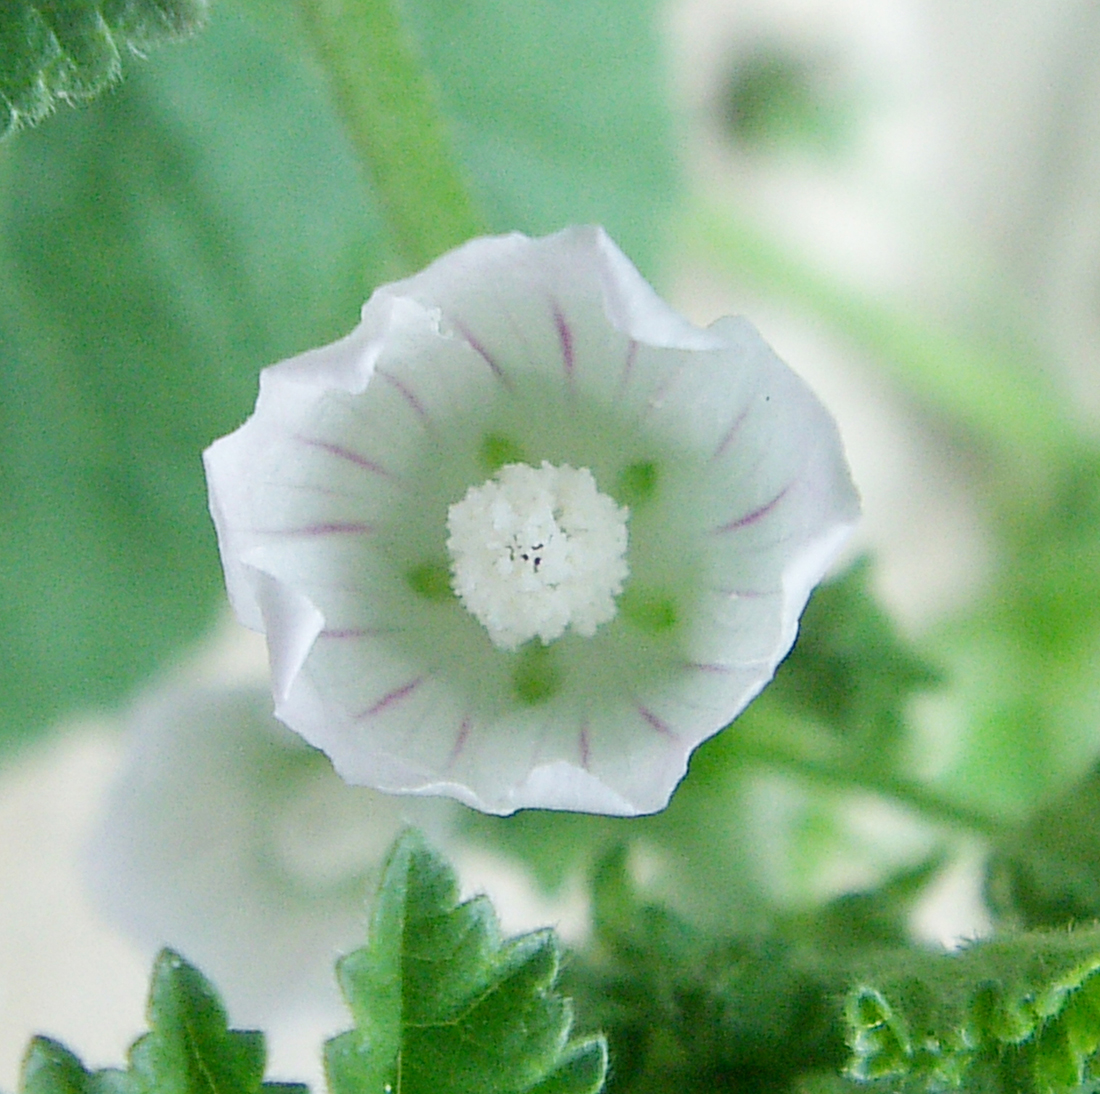 A whitish-pink flower that is in the process of opening, making it difficult to see the five petals